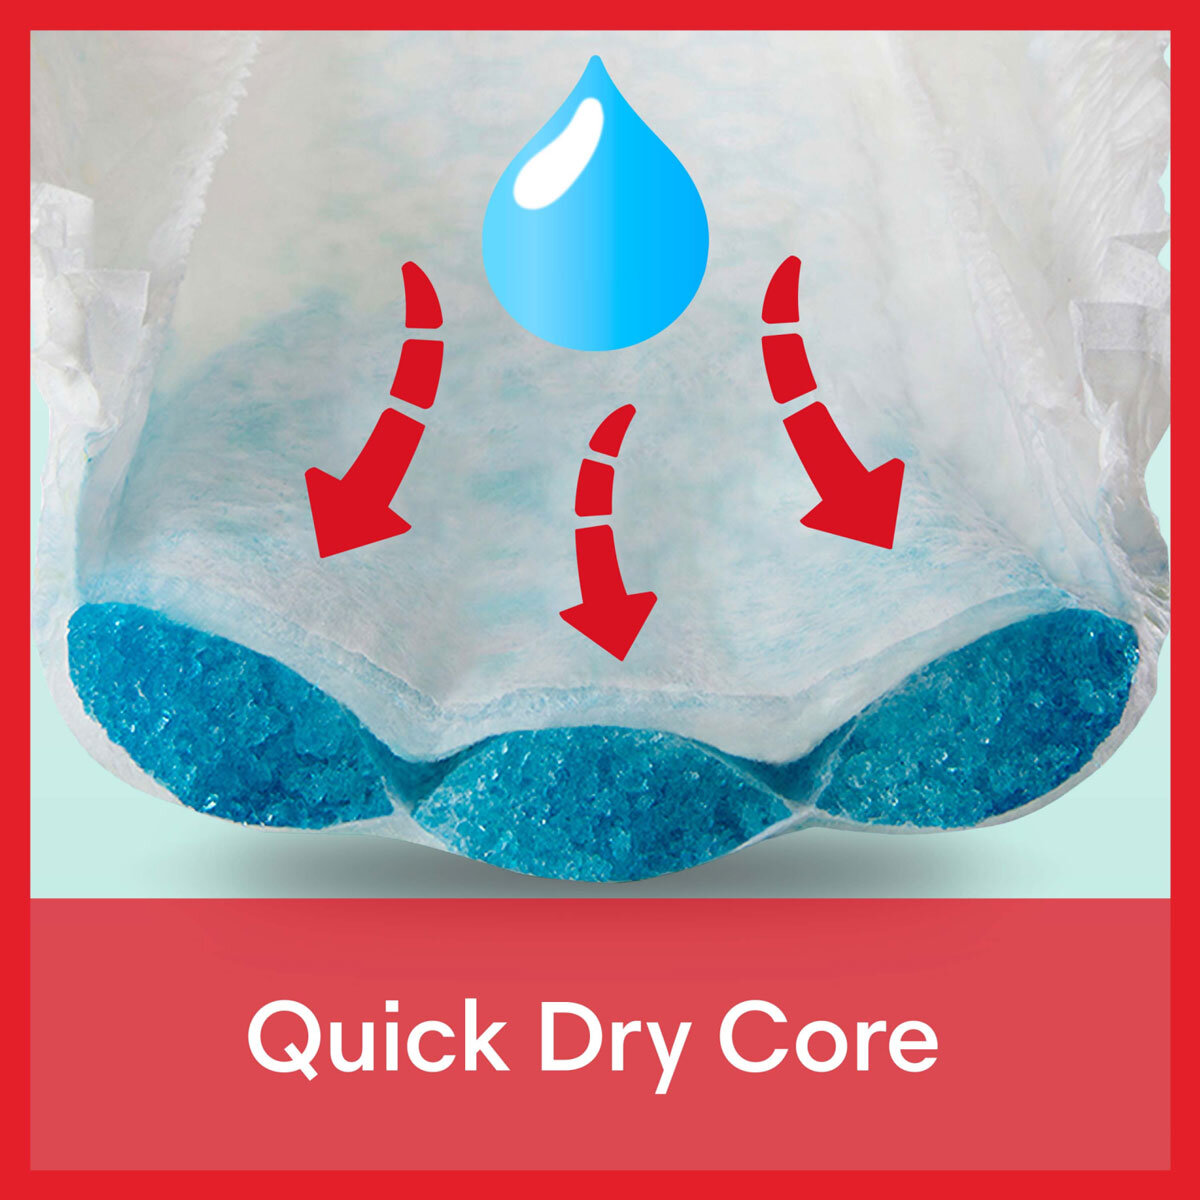 image to show quick dry core